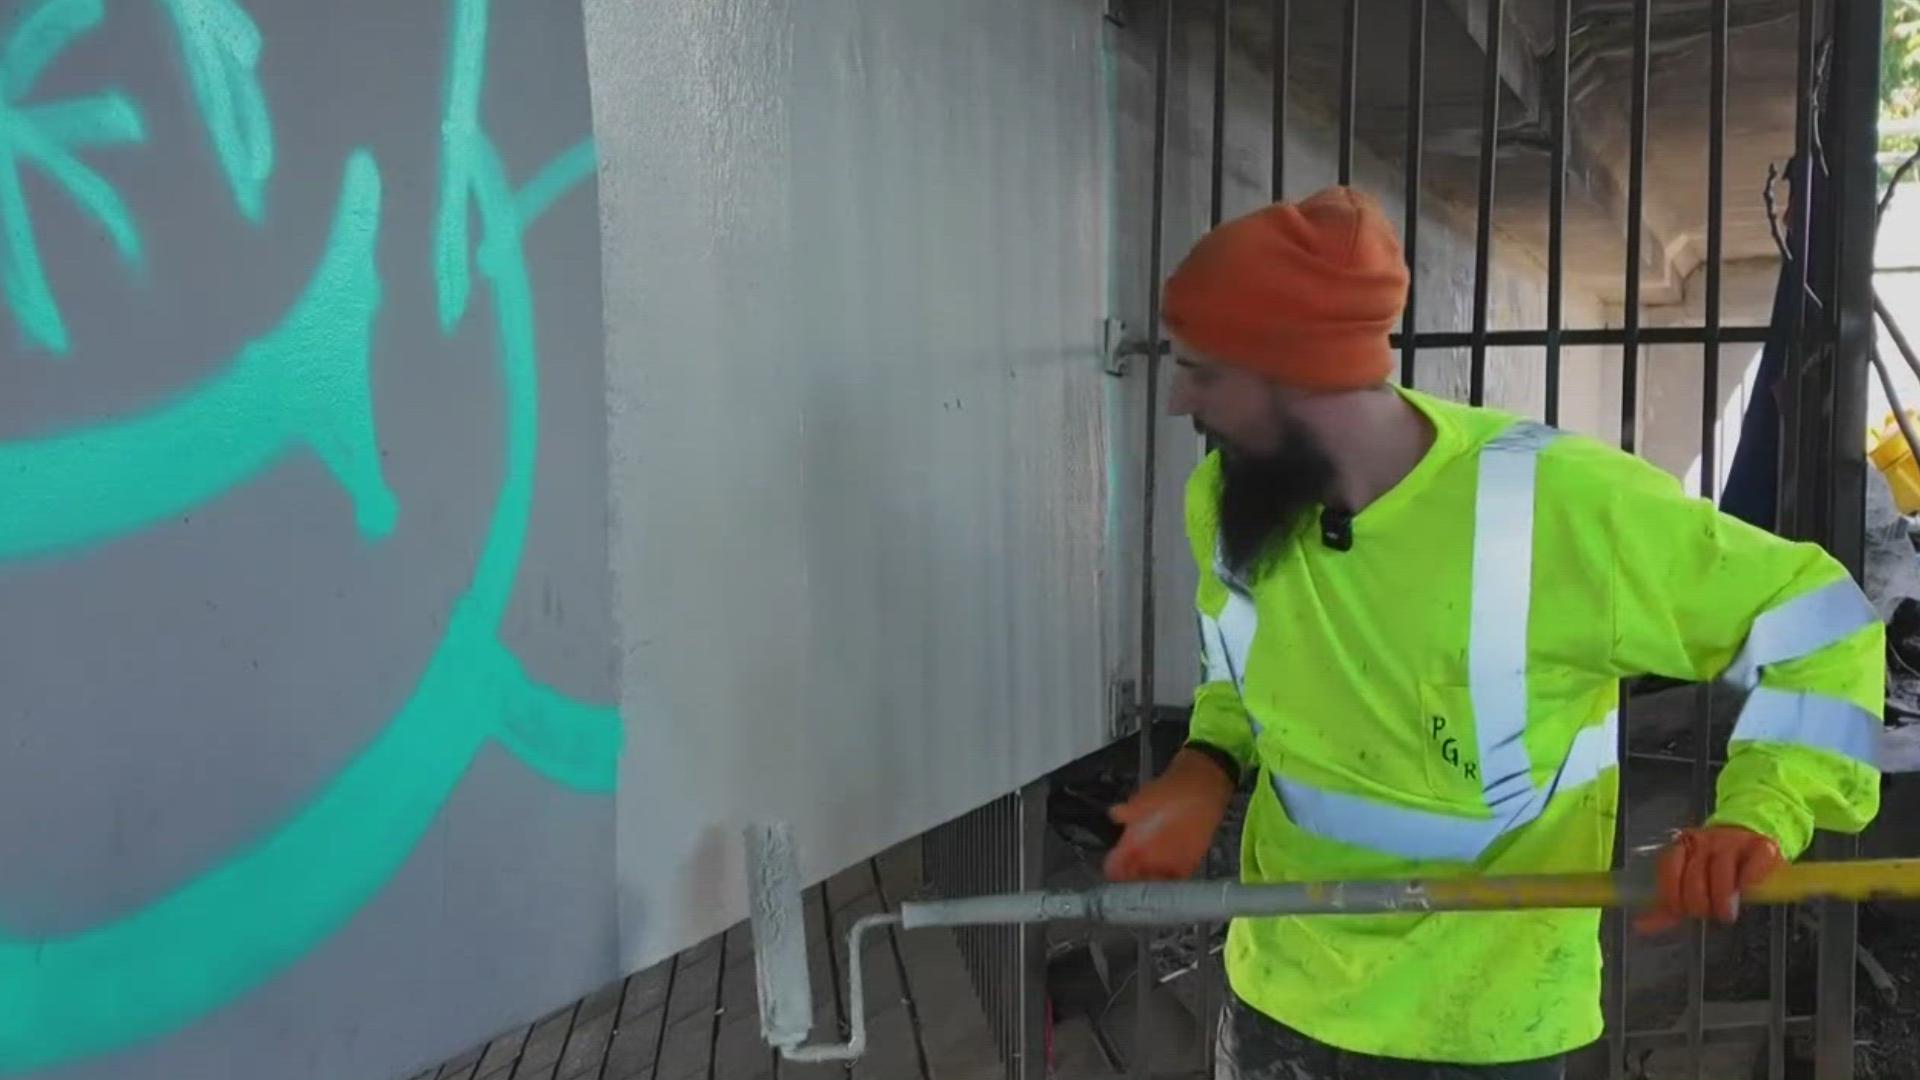 The Oregon Department of Transportation allocated $4 million to paint over graffiti along highways in the Portland area — but one month later the graffiti returns.